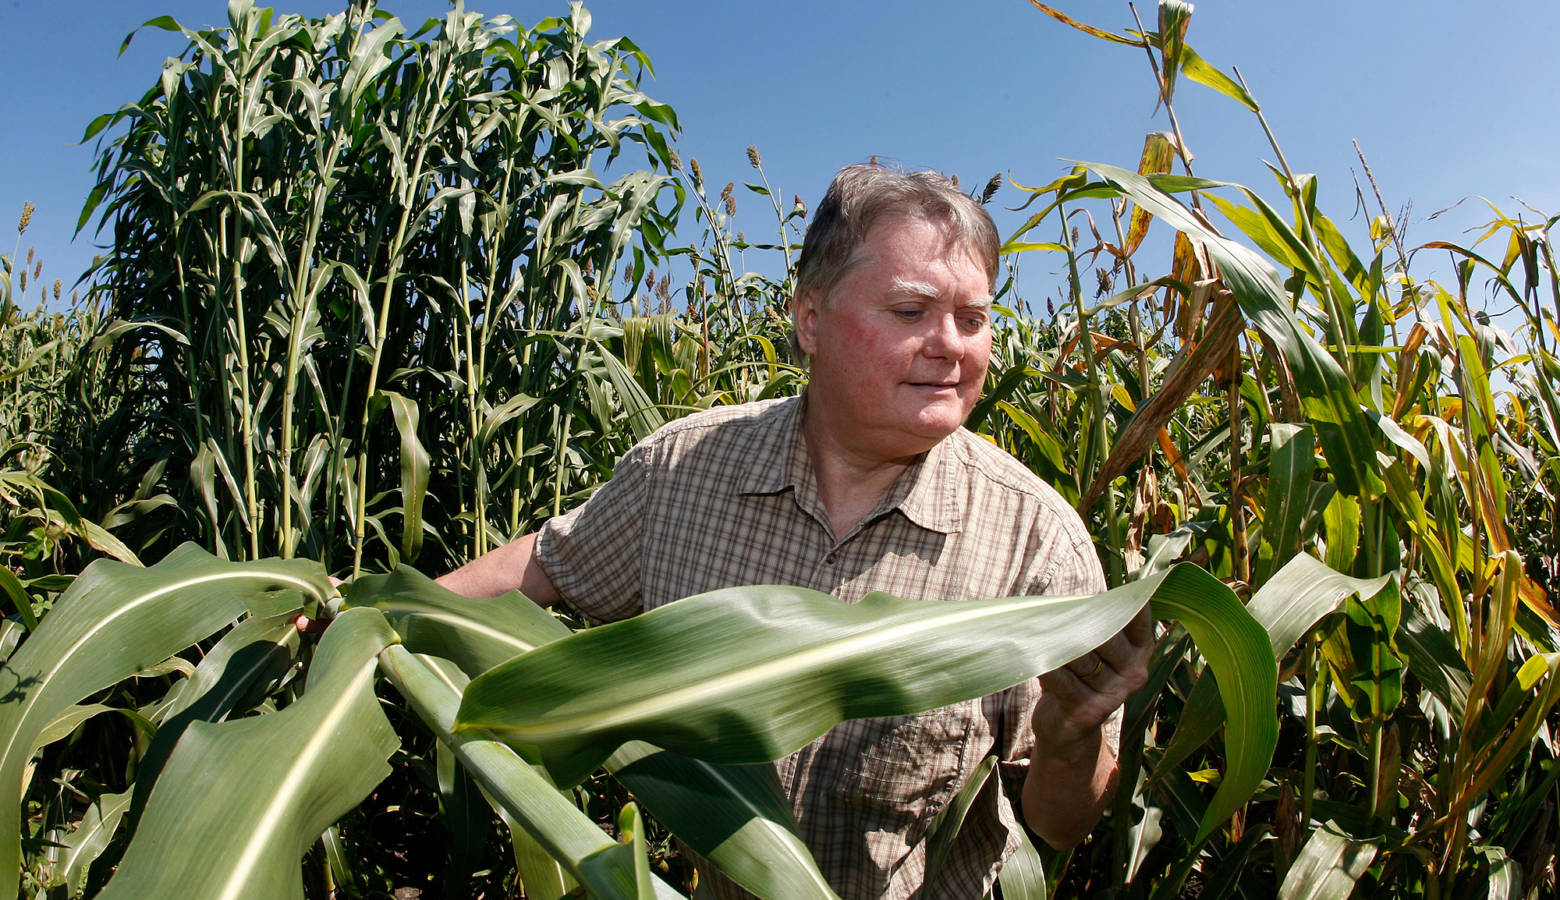 Purdue plant biologist Nick Carpita in a field of sorghum. (Tom Campbell/Purdue Agricultural Communication)